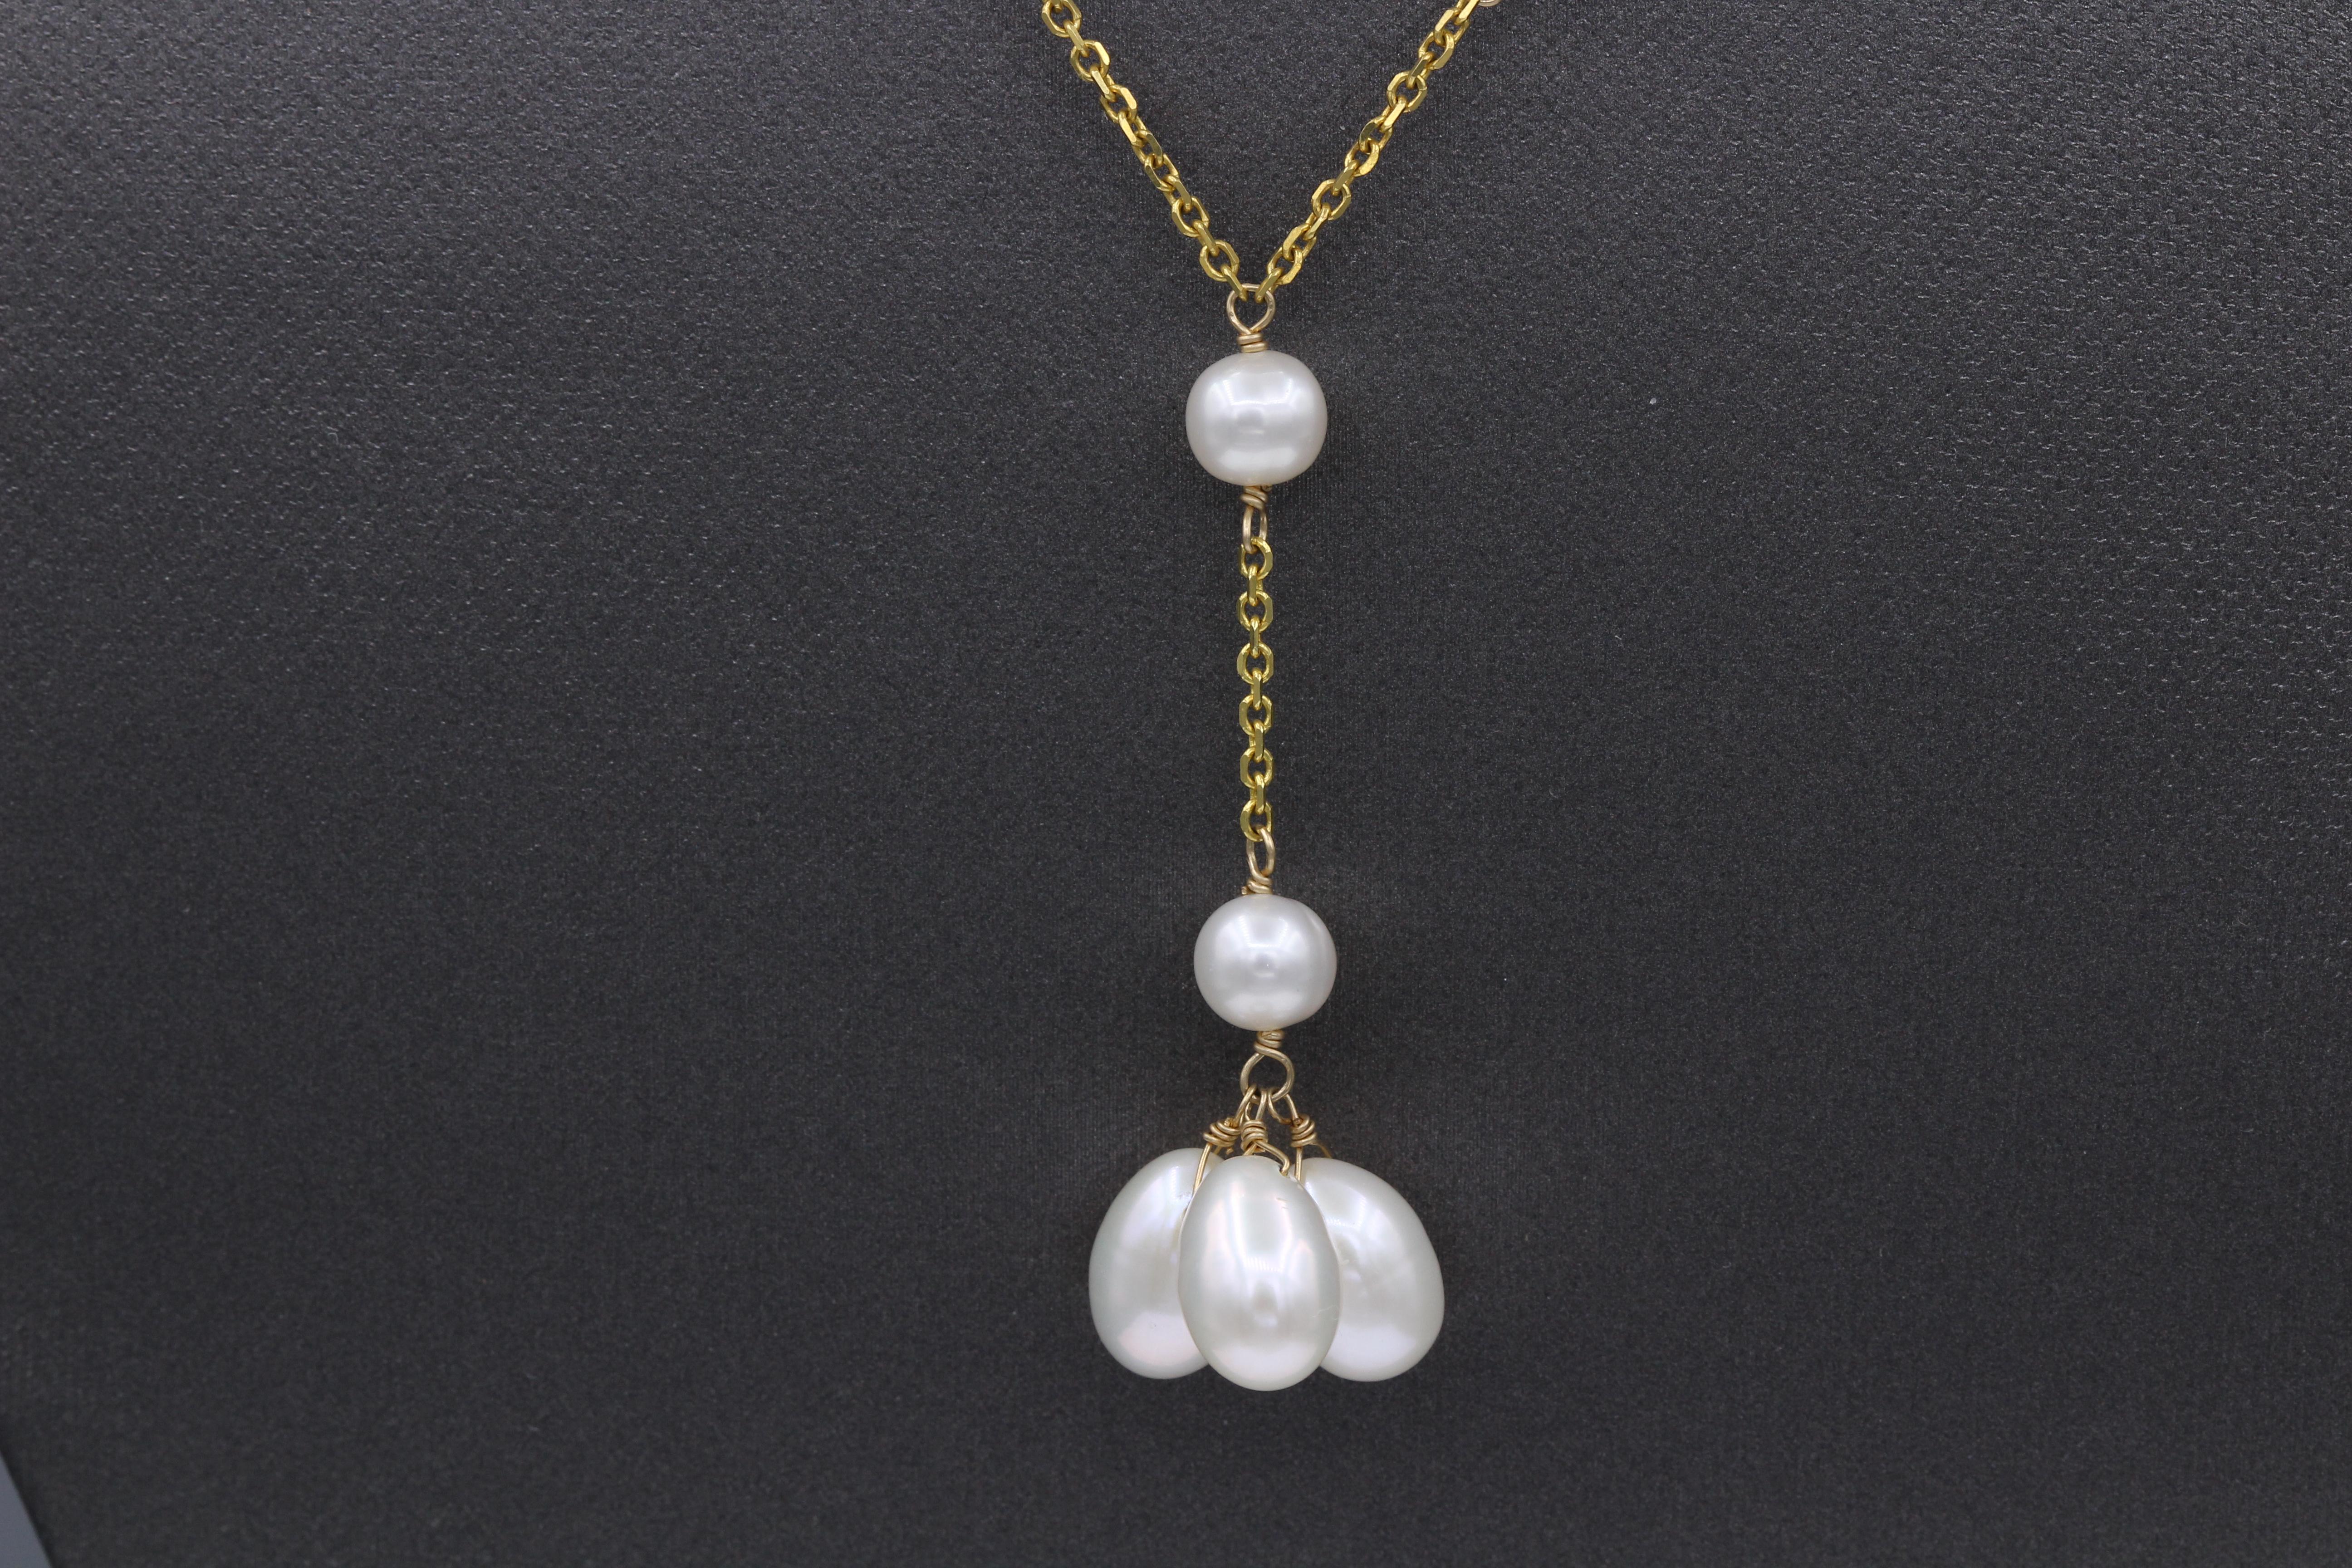 Round Cut Elegant Pearl Necklace Beaded Wire Style 14k Yellow Gold Dangle Pearls For Sale